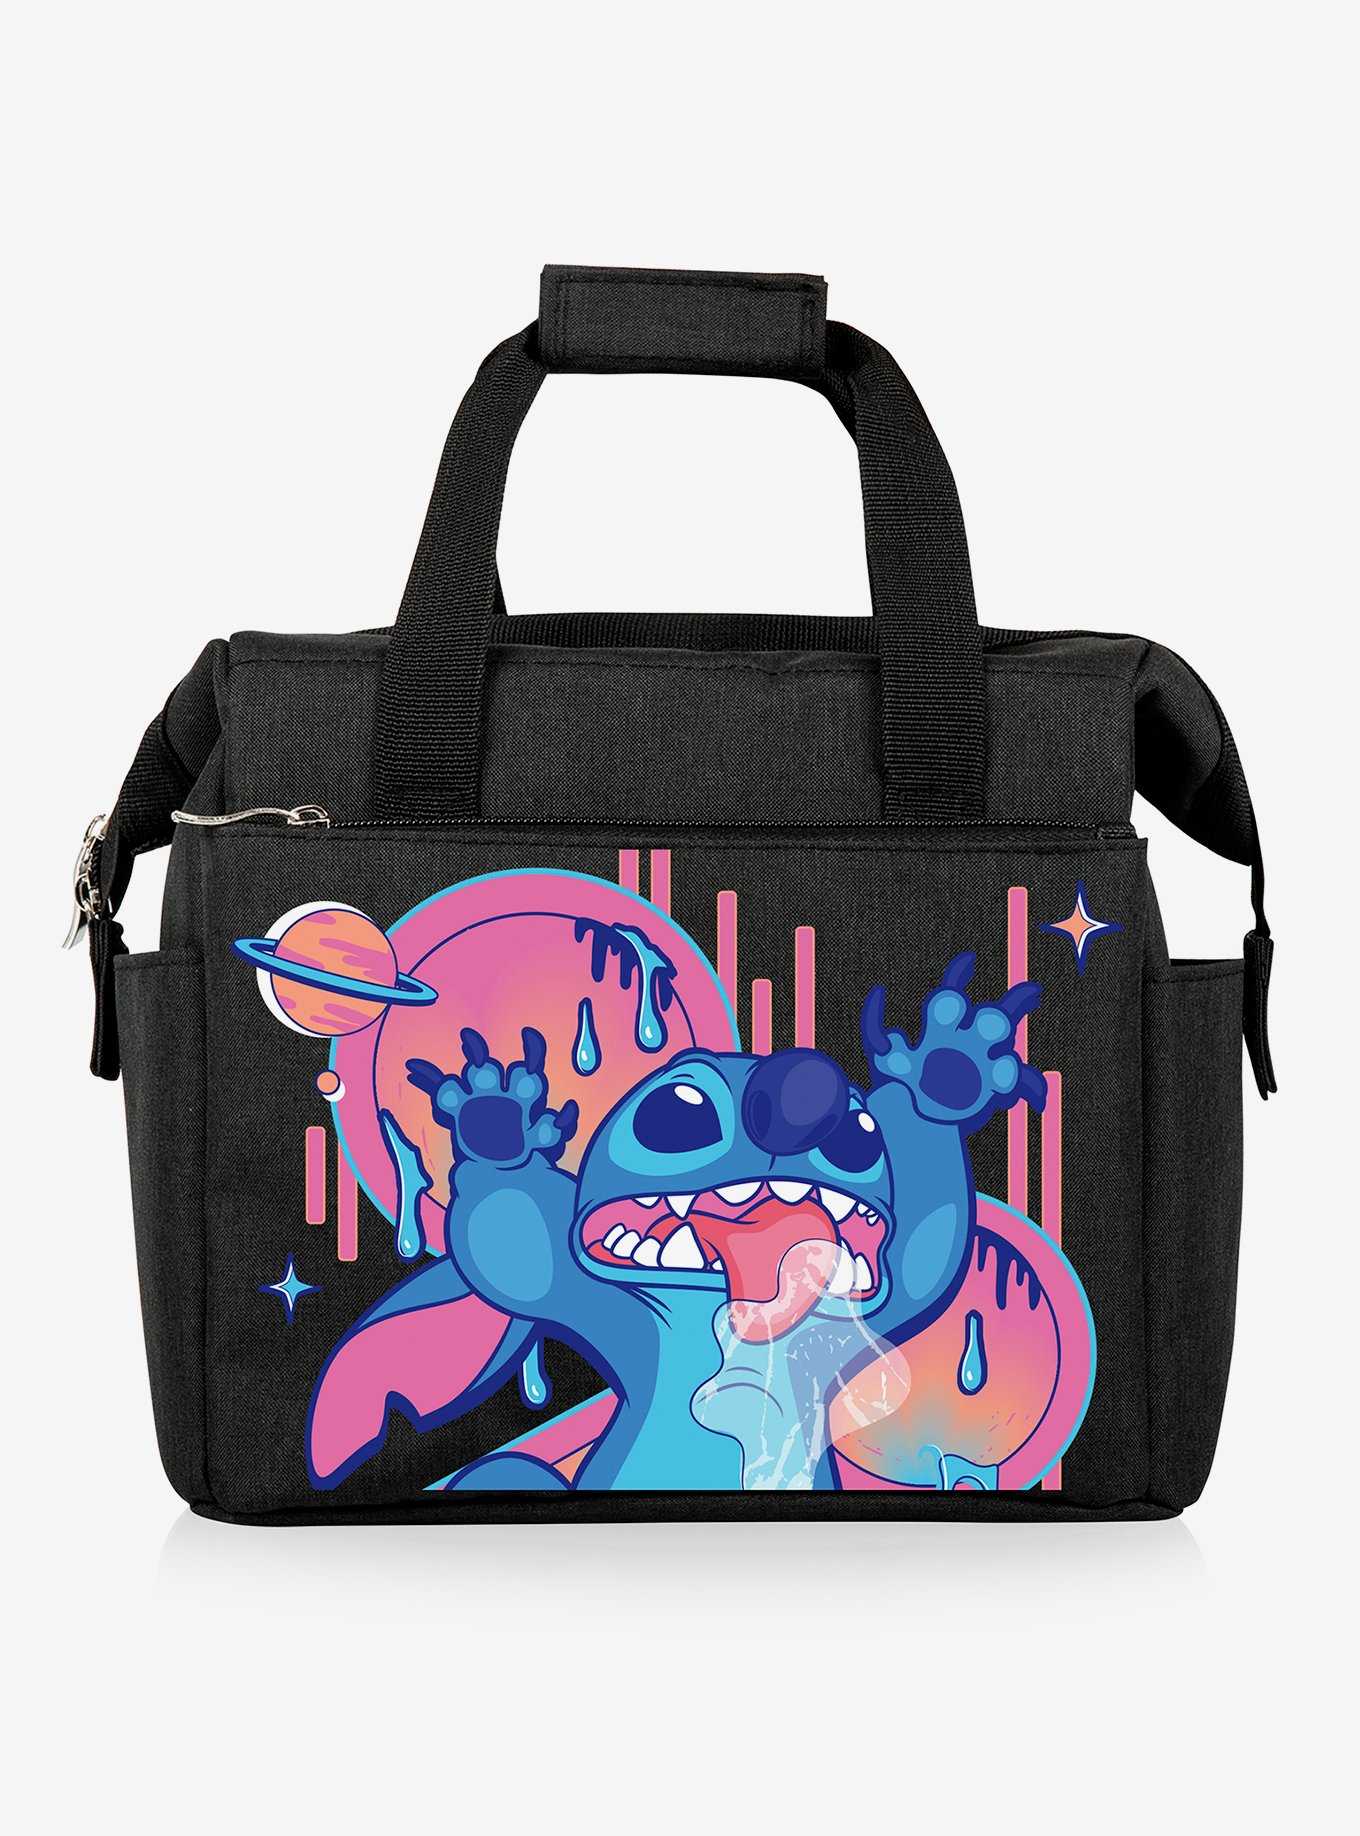 Stitch Lunch Box School Lunch Box Lunch Bag Tote for Childrens